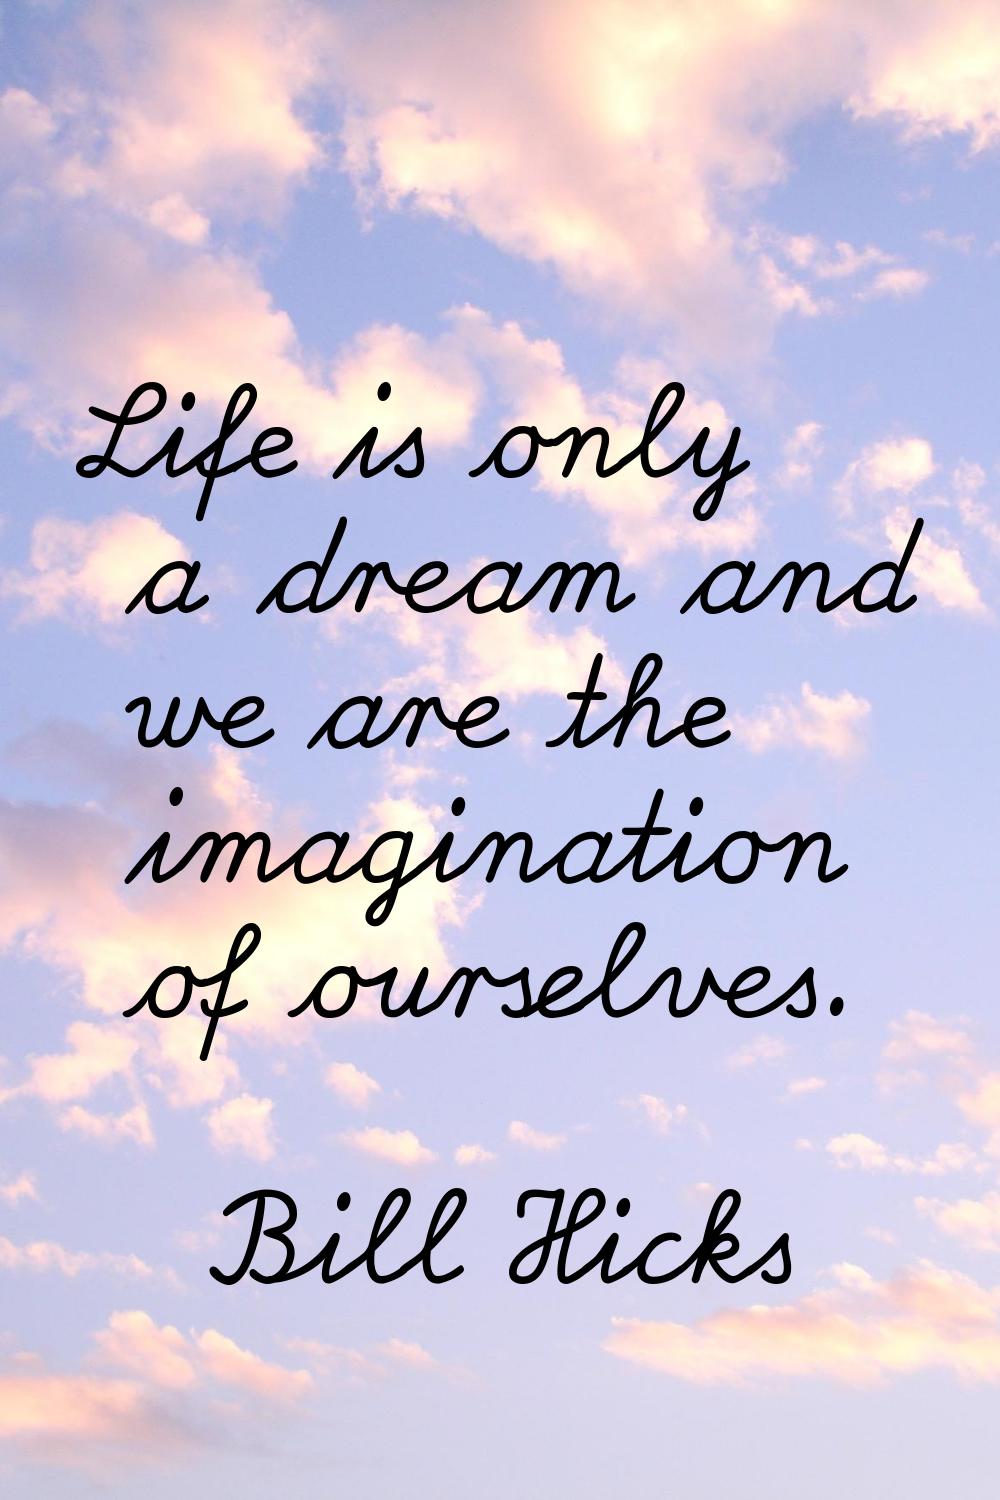 Life is only a dream and we are the imagination of ourselves.